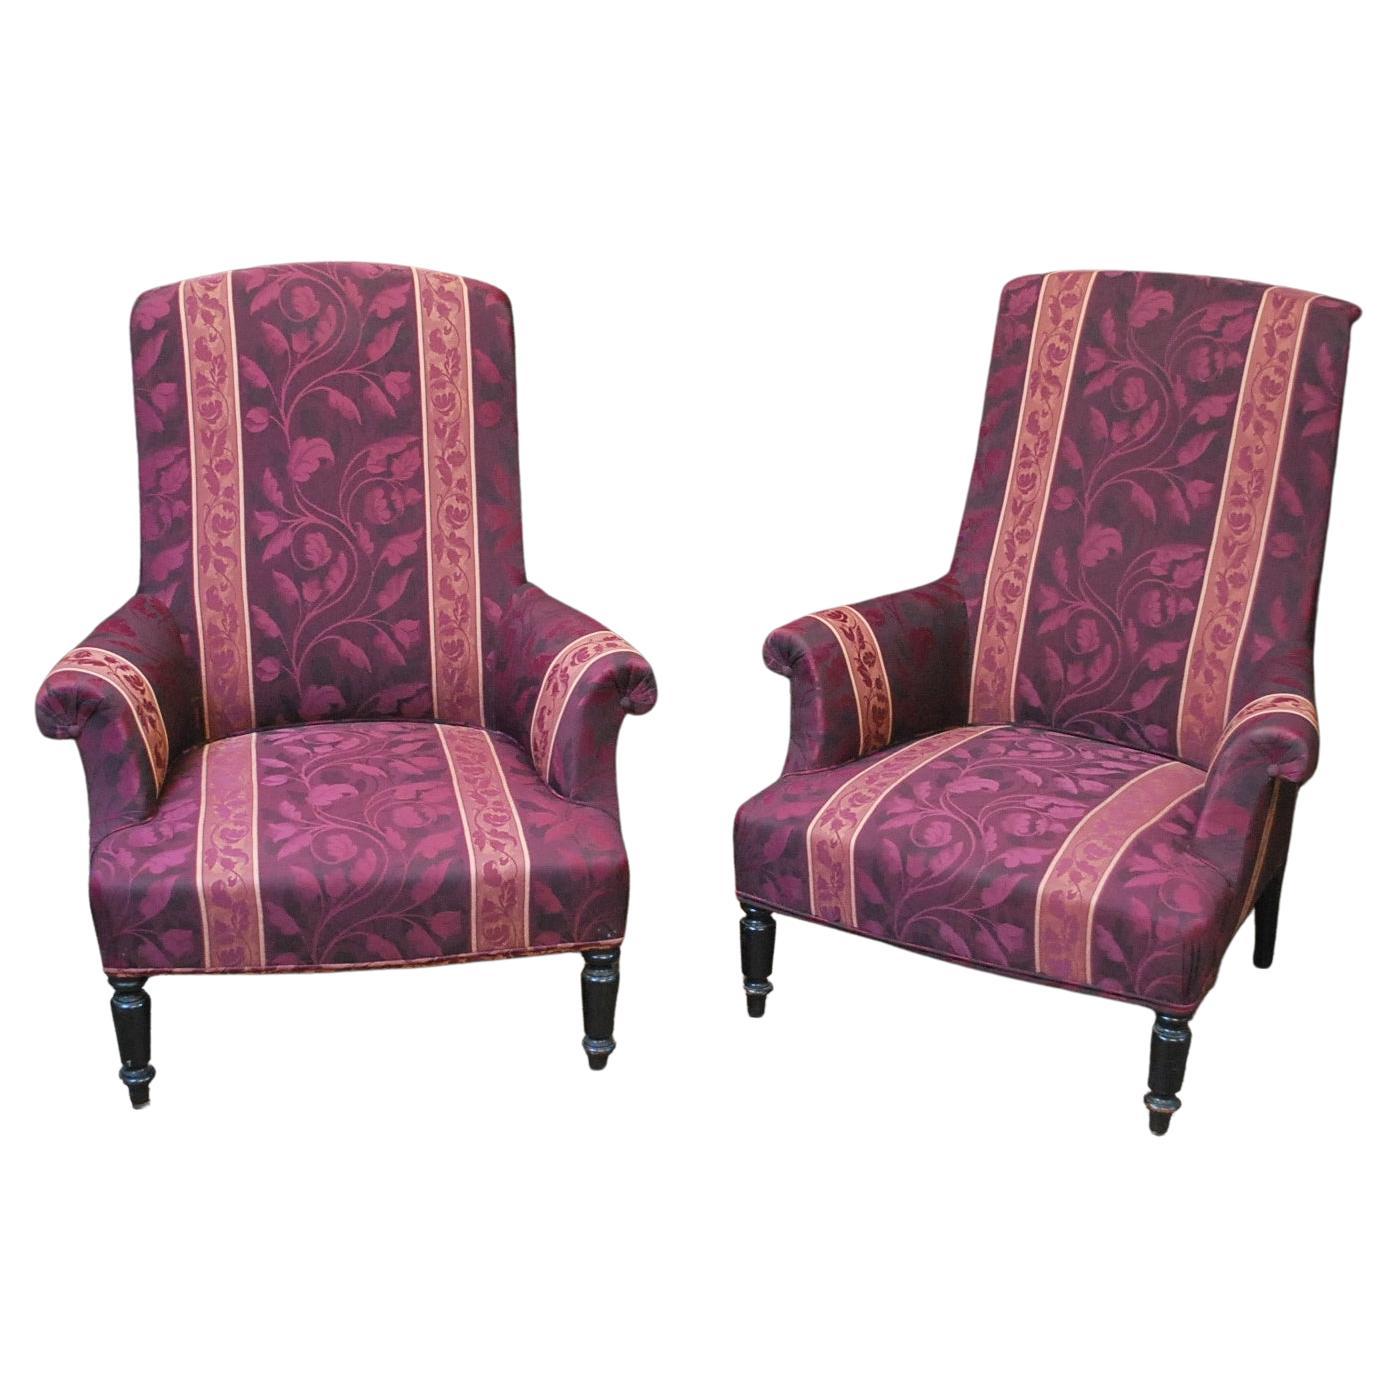 Pair of armchairs /Fauteuils For Sale